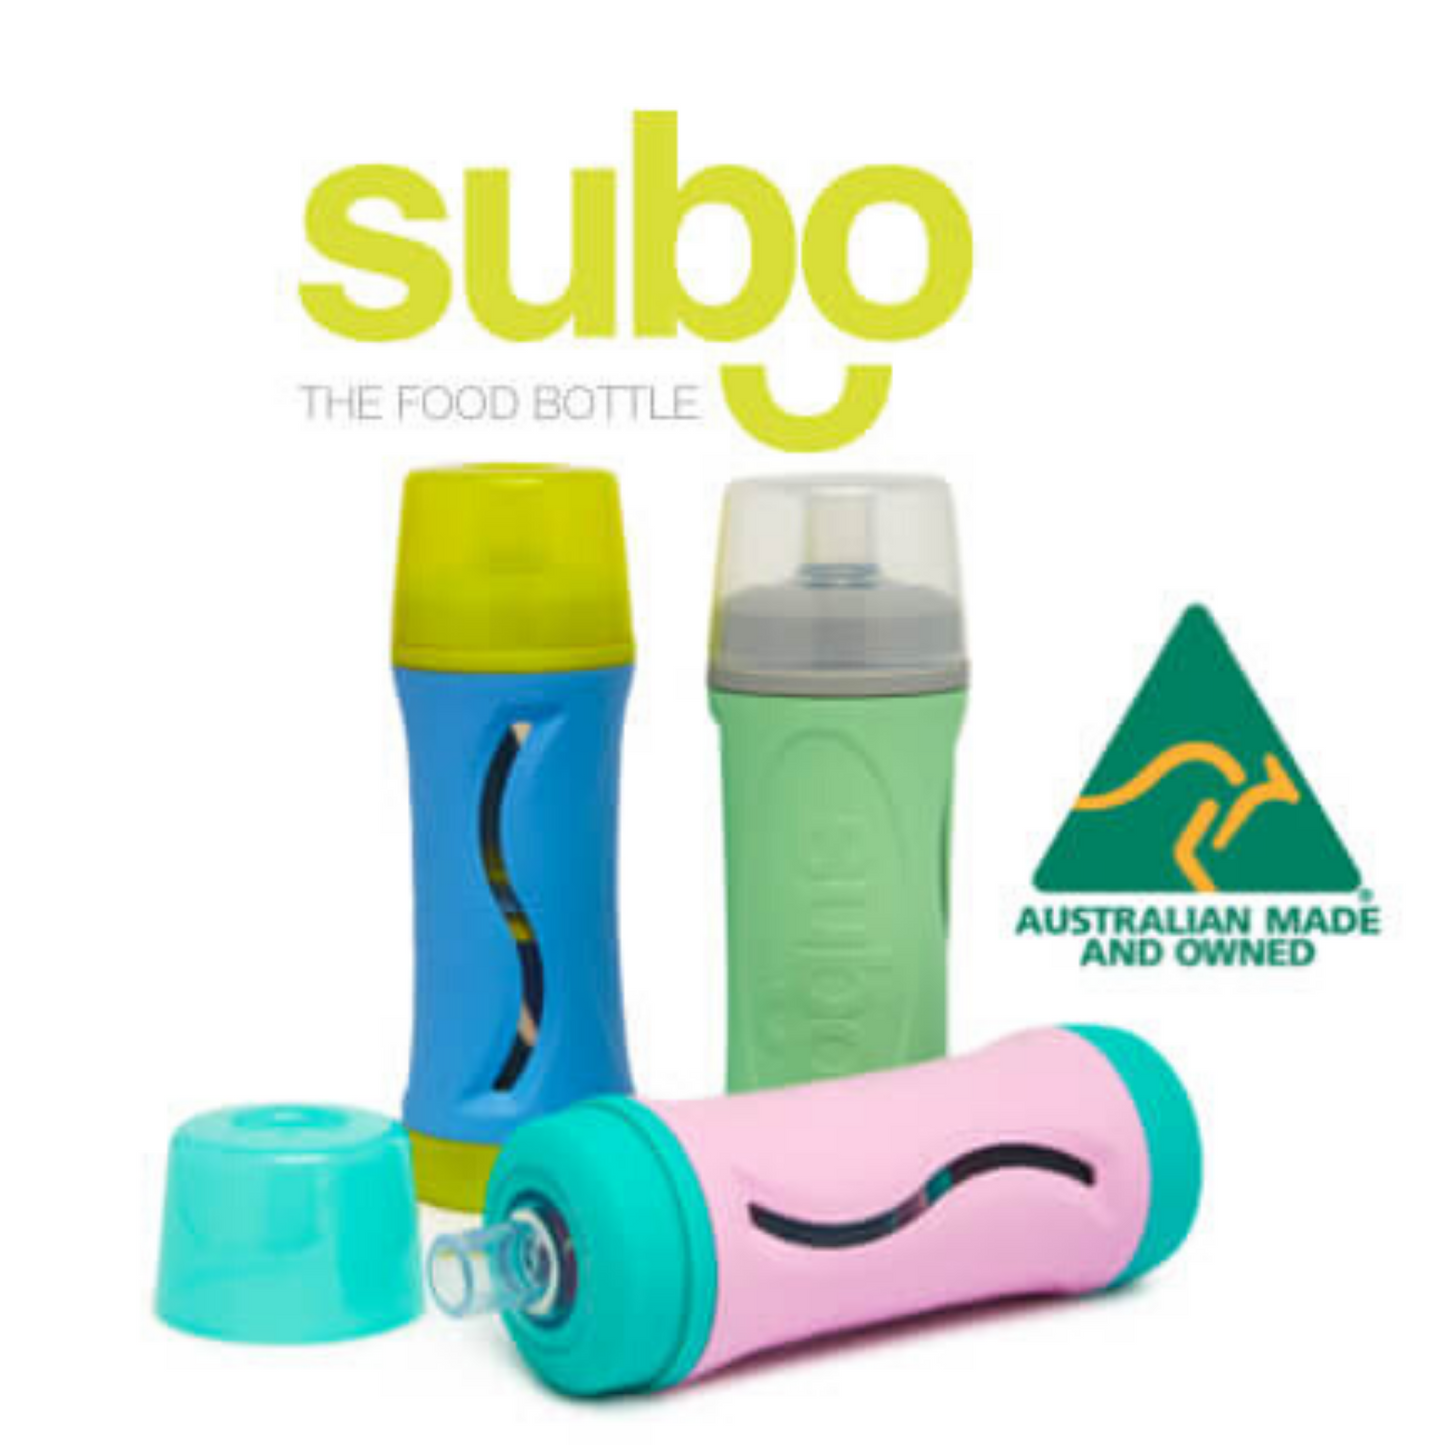 SUBO - The Food Bottle